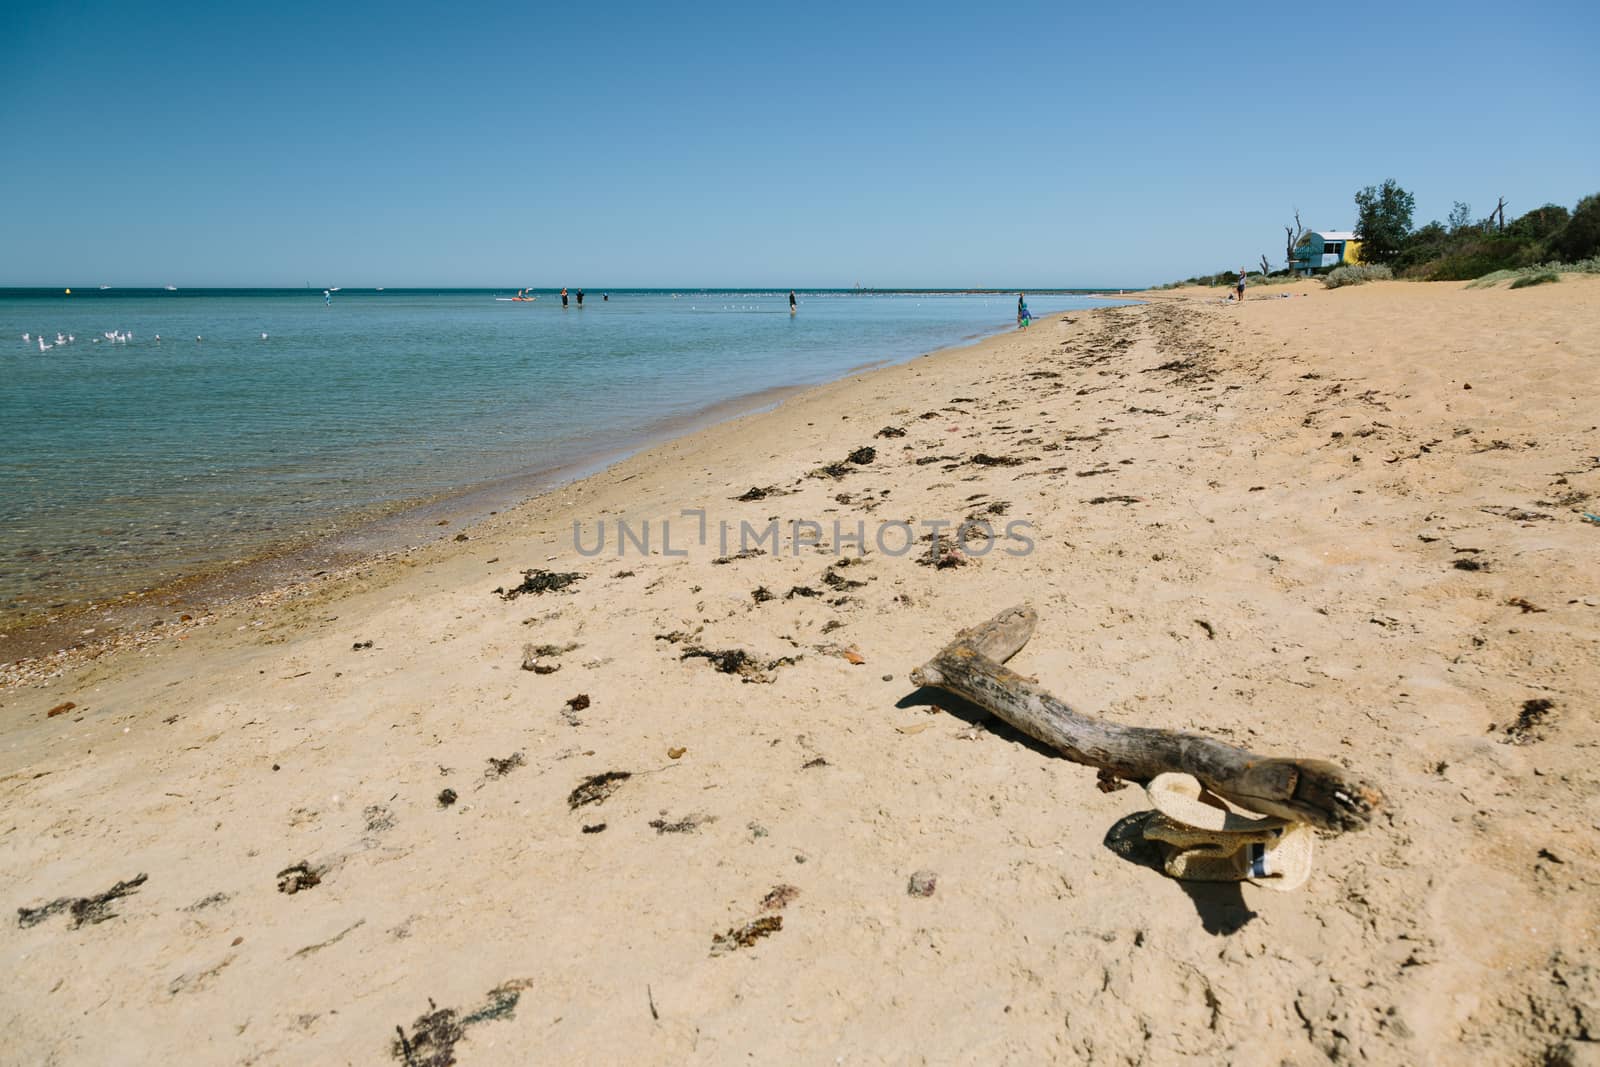 A photo of one of Melbourne's Beaches with a weathered log in the foreground and some people in the distance.